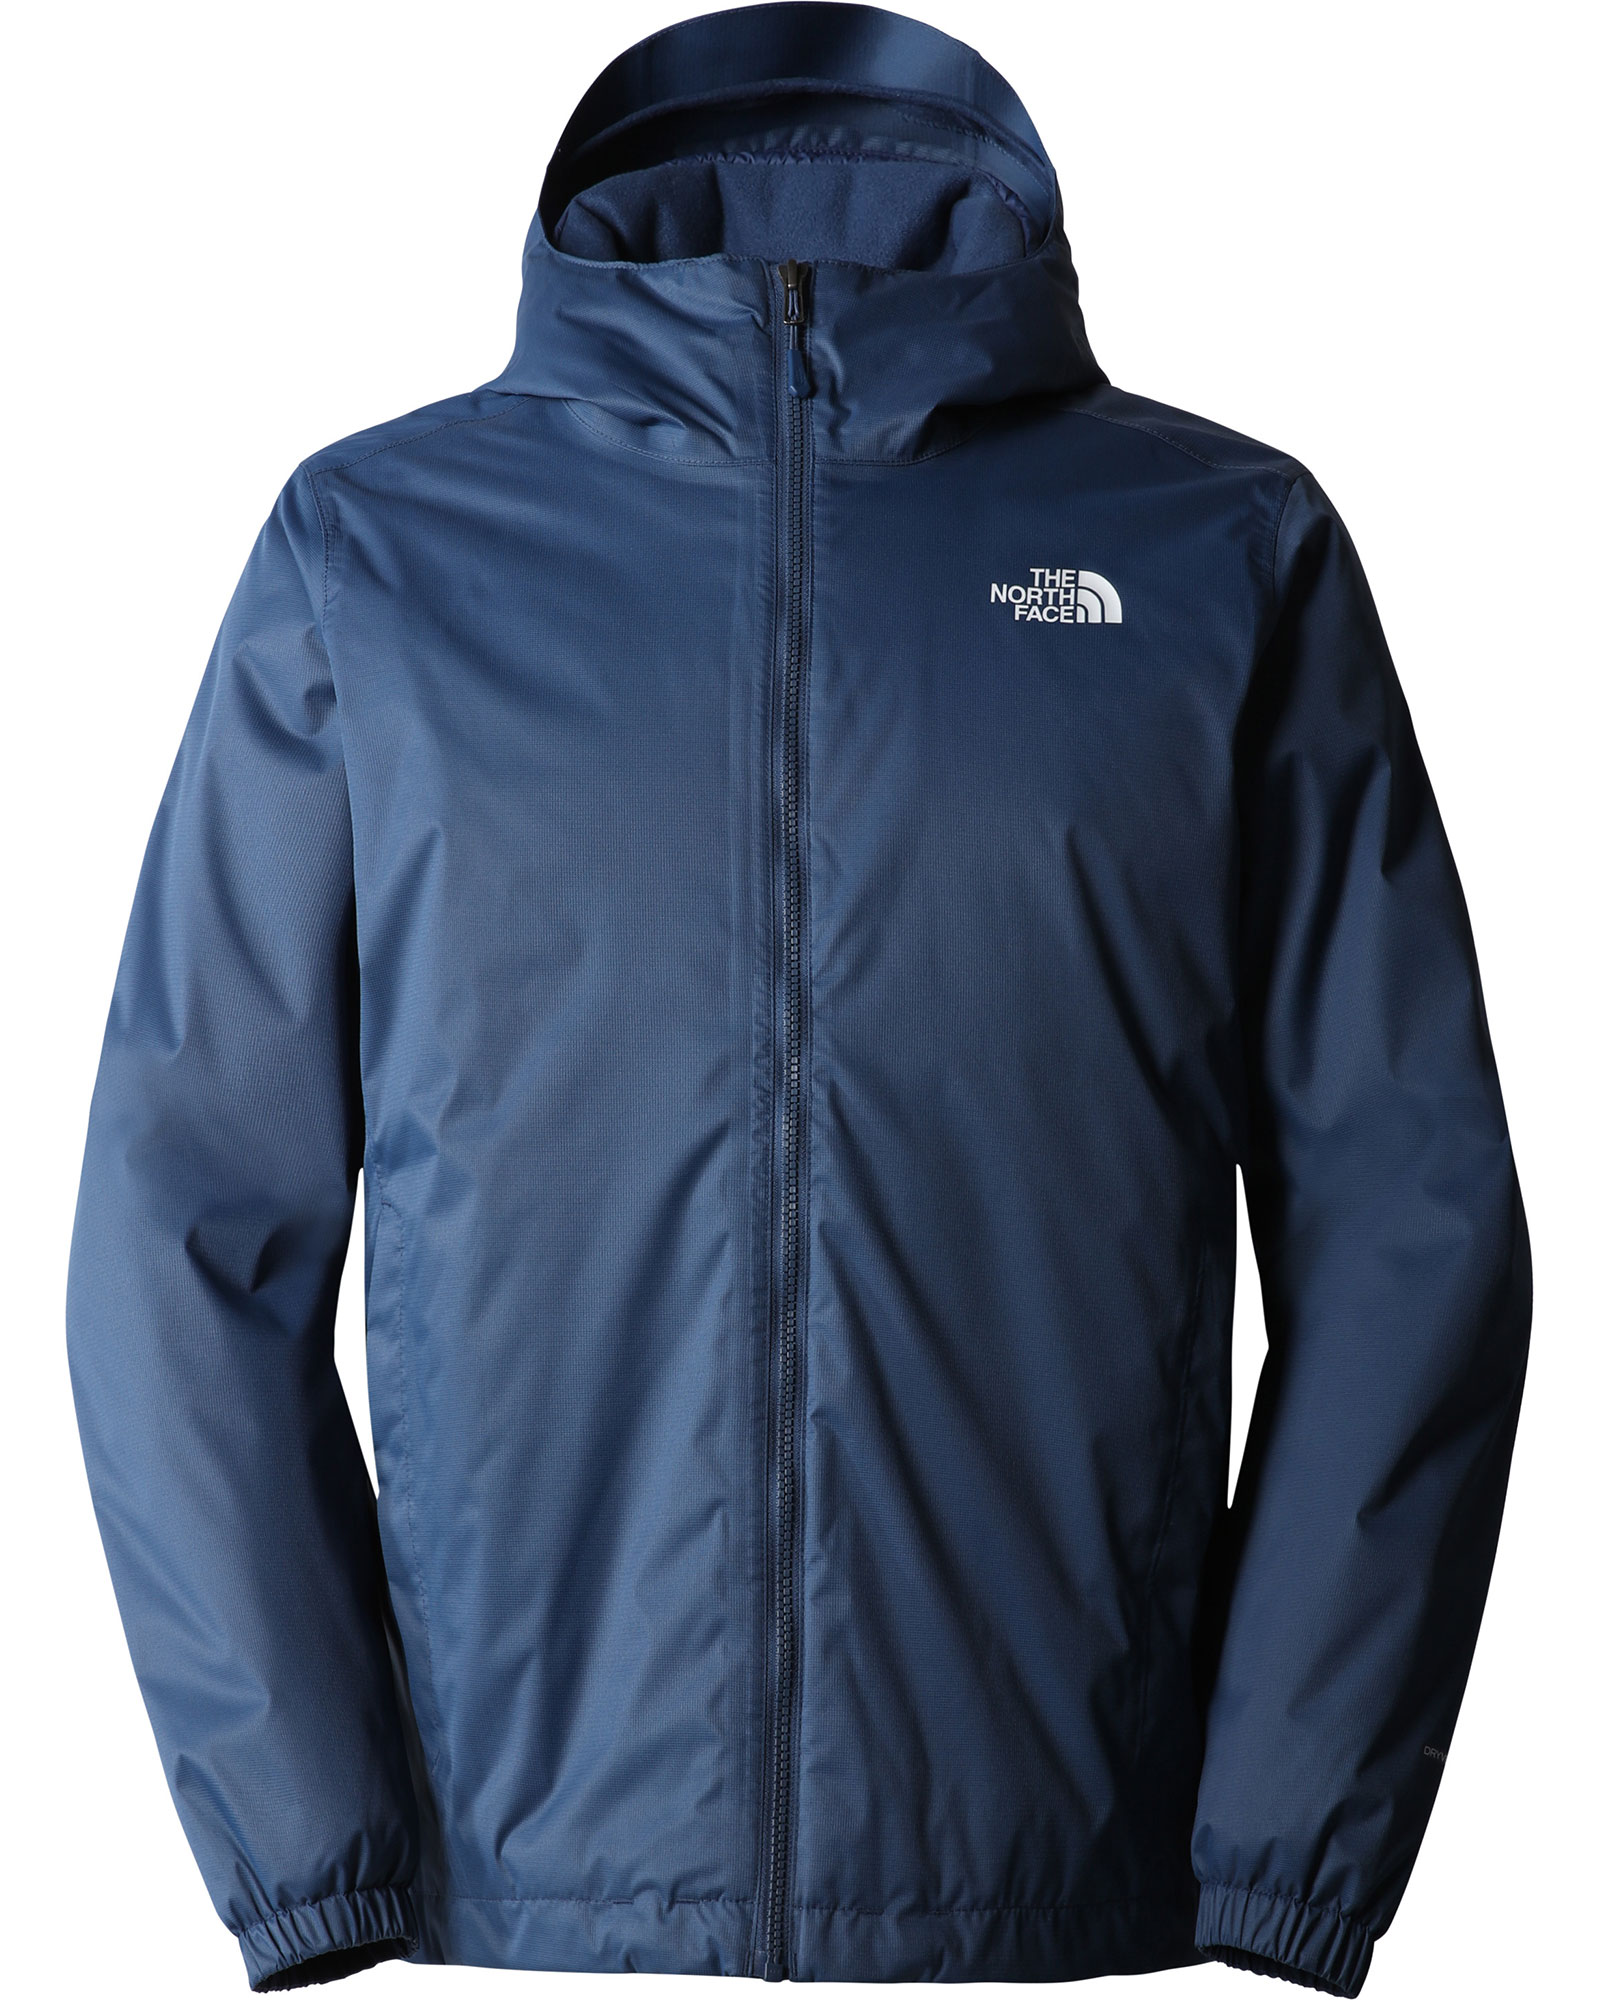 The North Face Quest DryVent Men’s Insulated Jacket - Shady Blue Black Heather XL